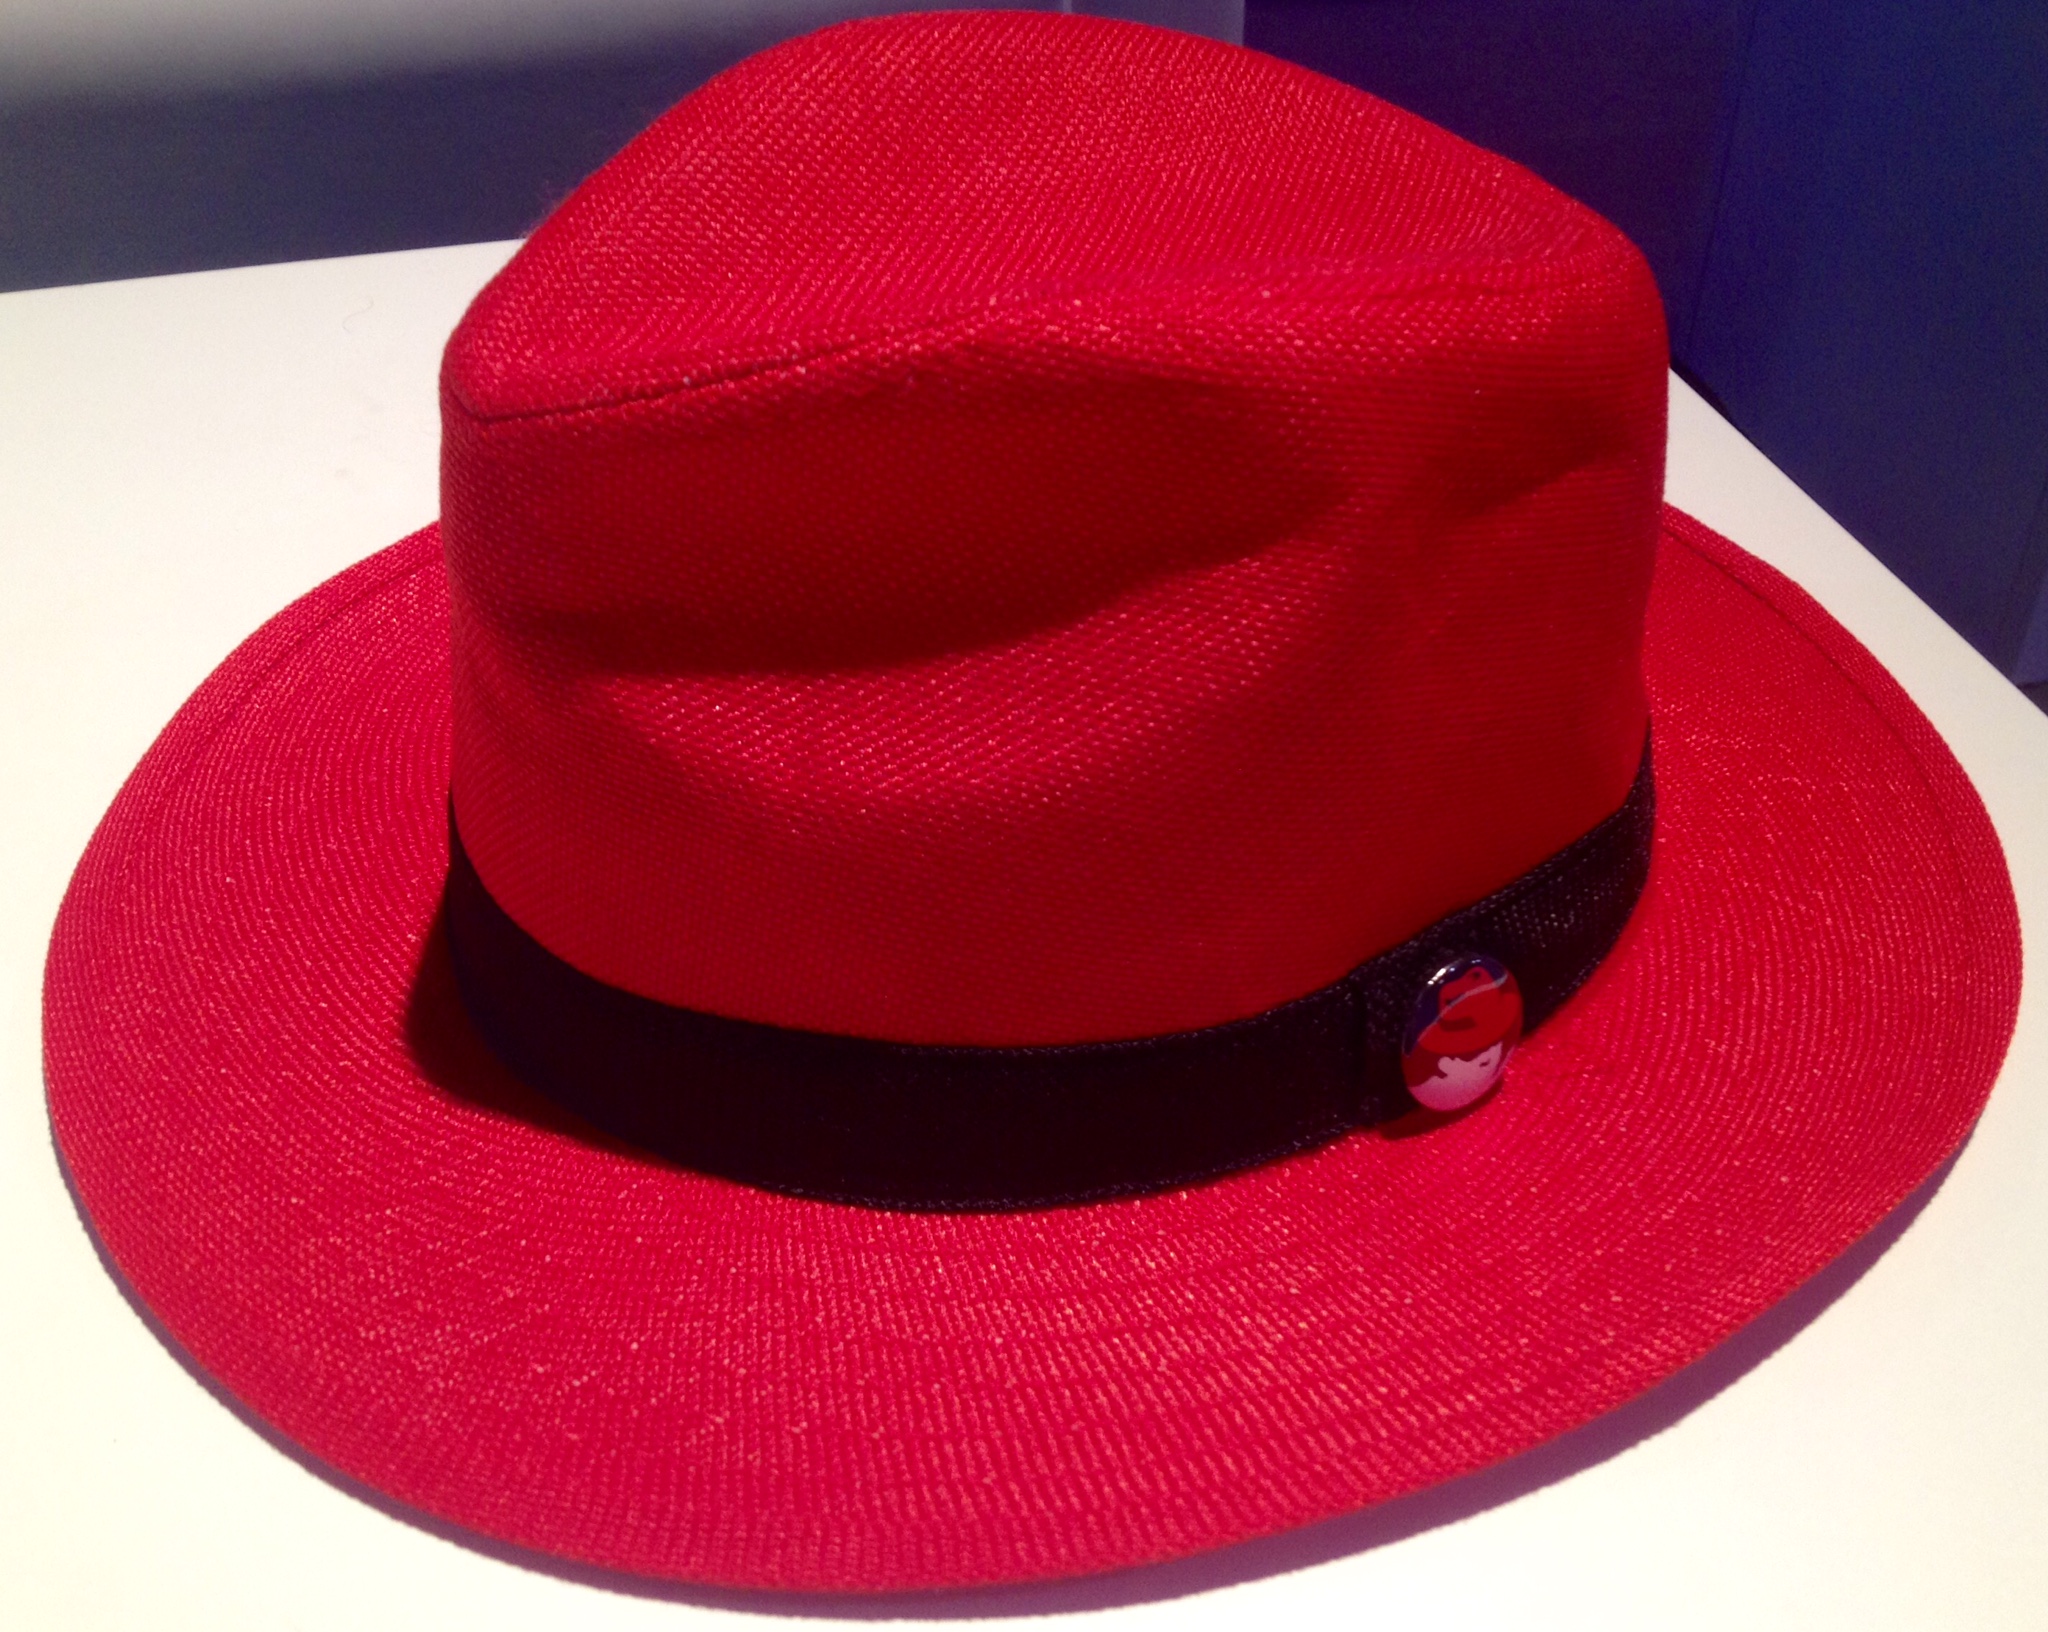 A RedHat Red Hat